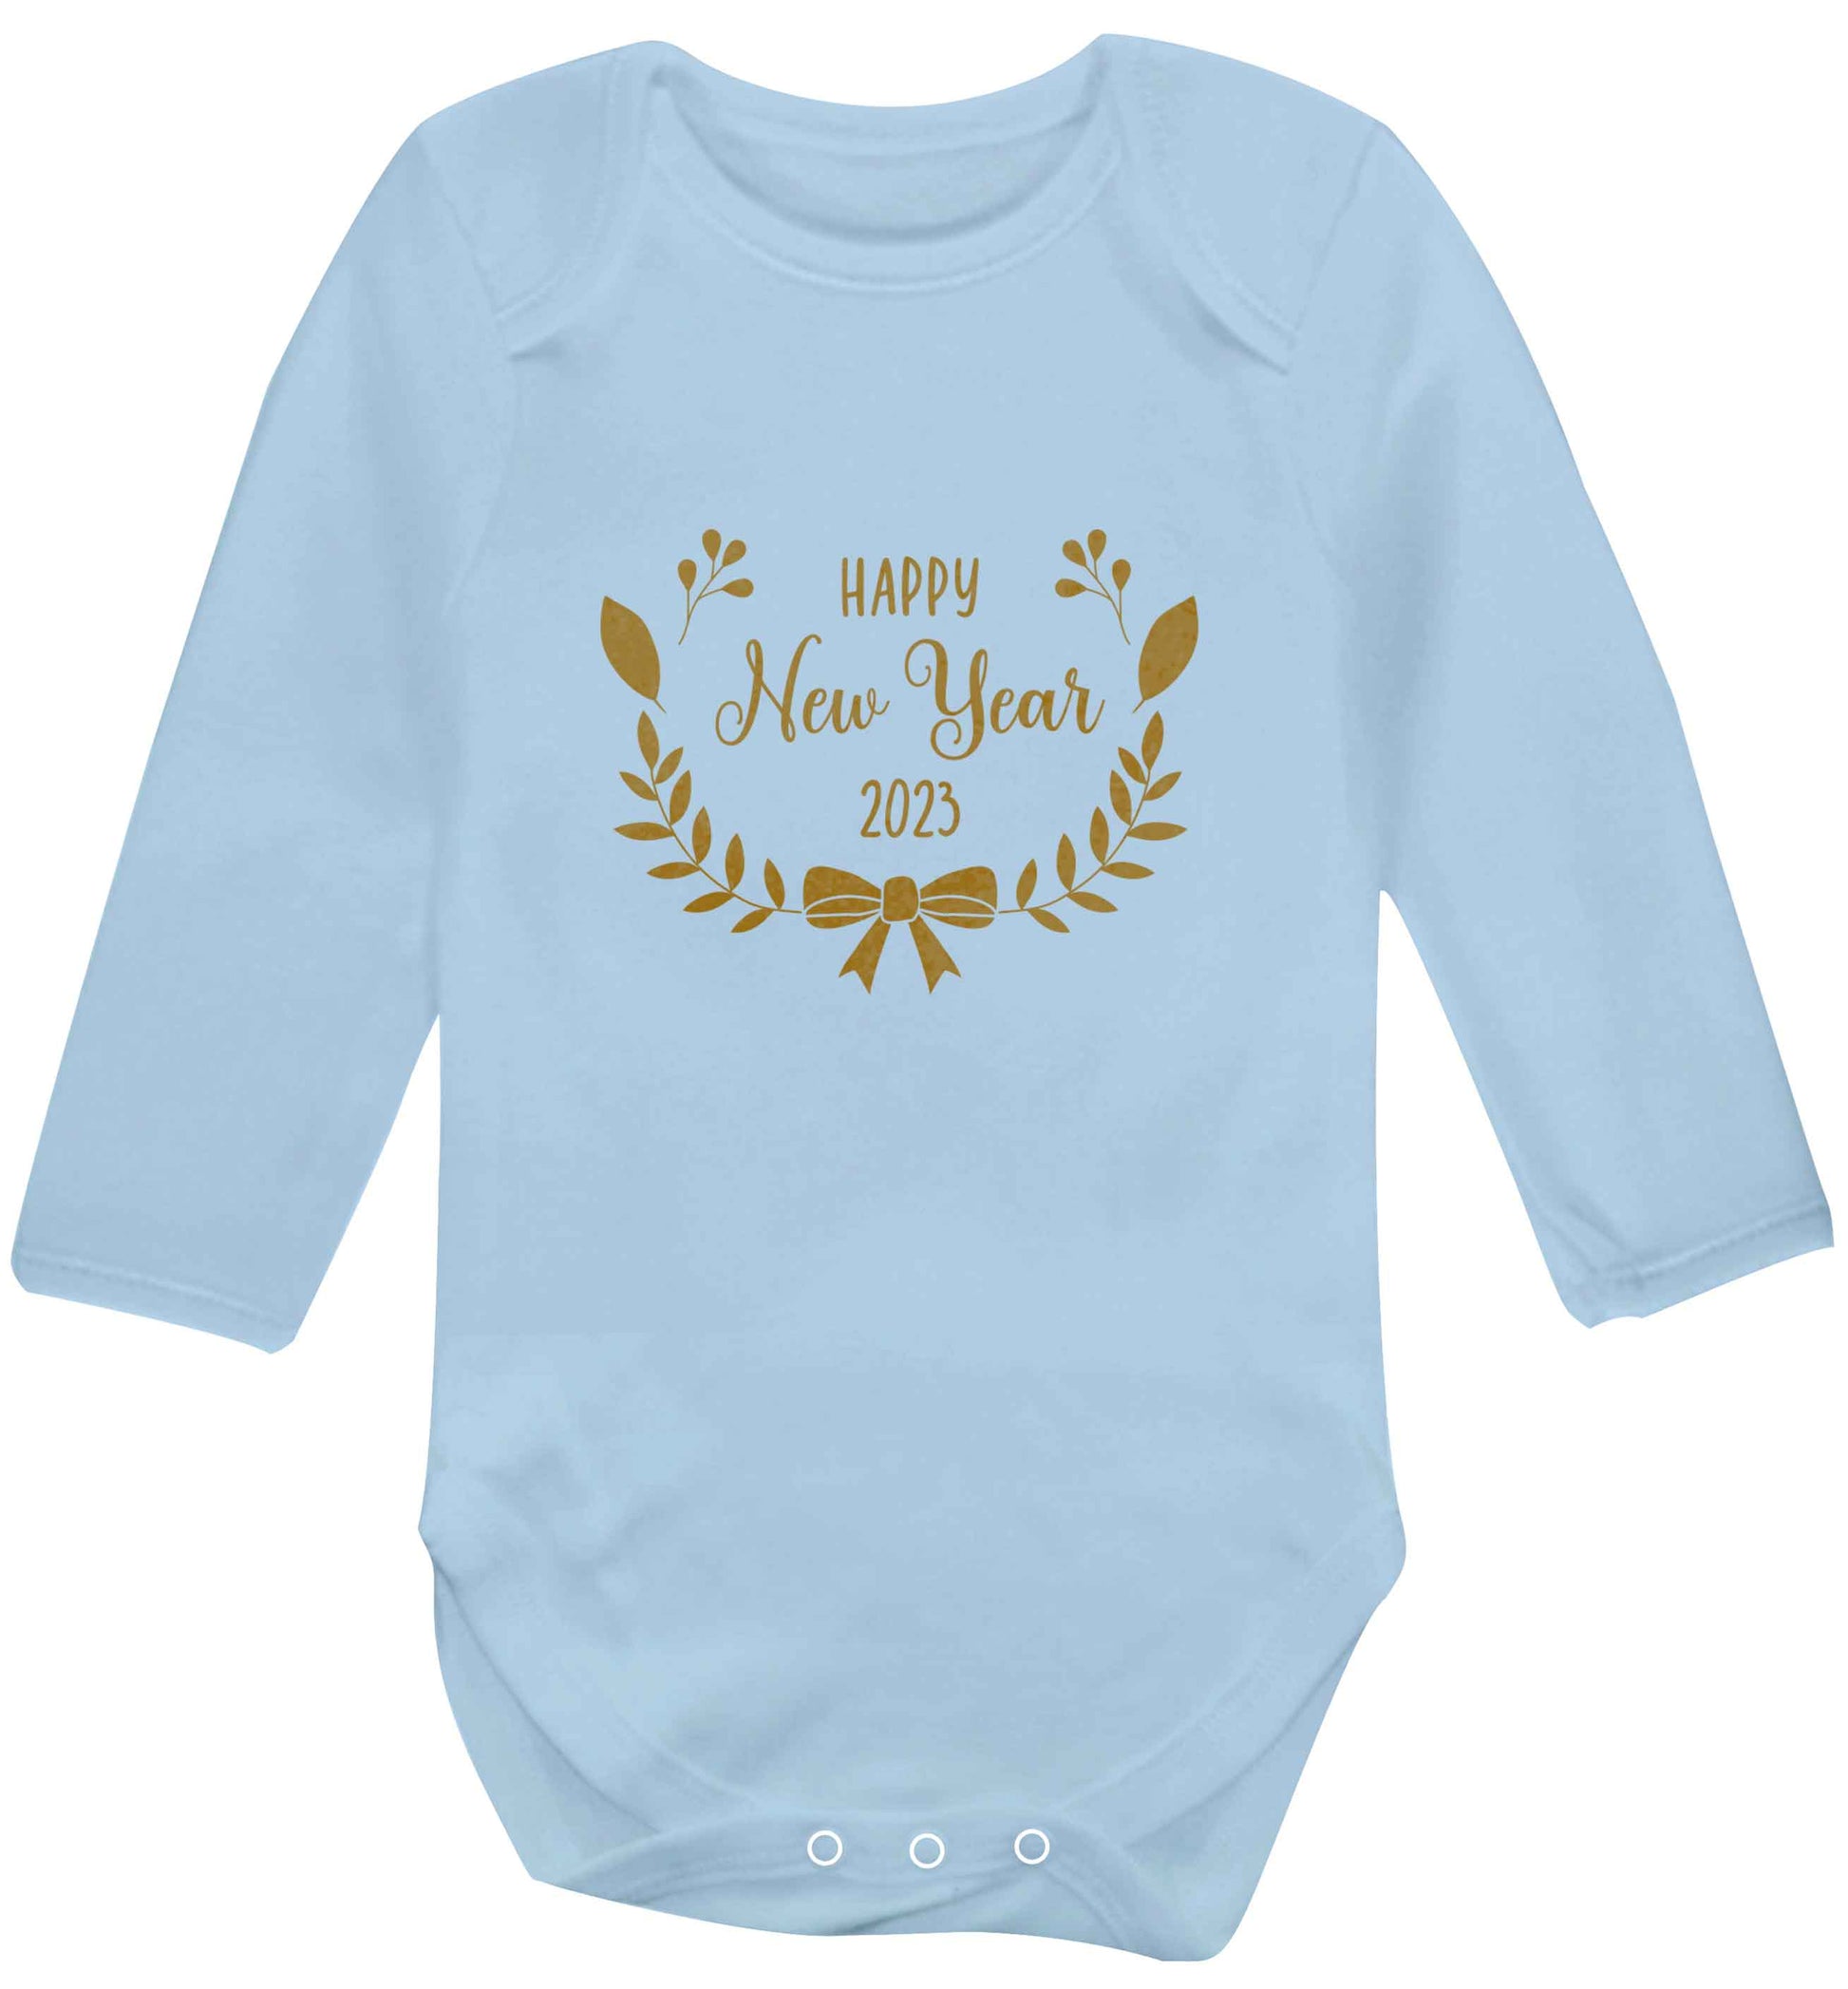 Happy New Year 2023 baby vest long sleeved pale blue 6-12 months